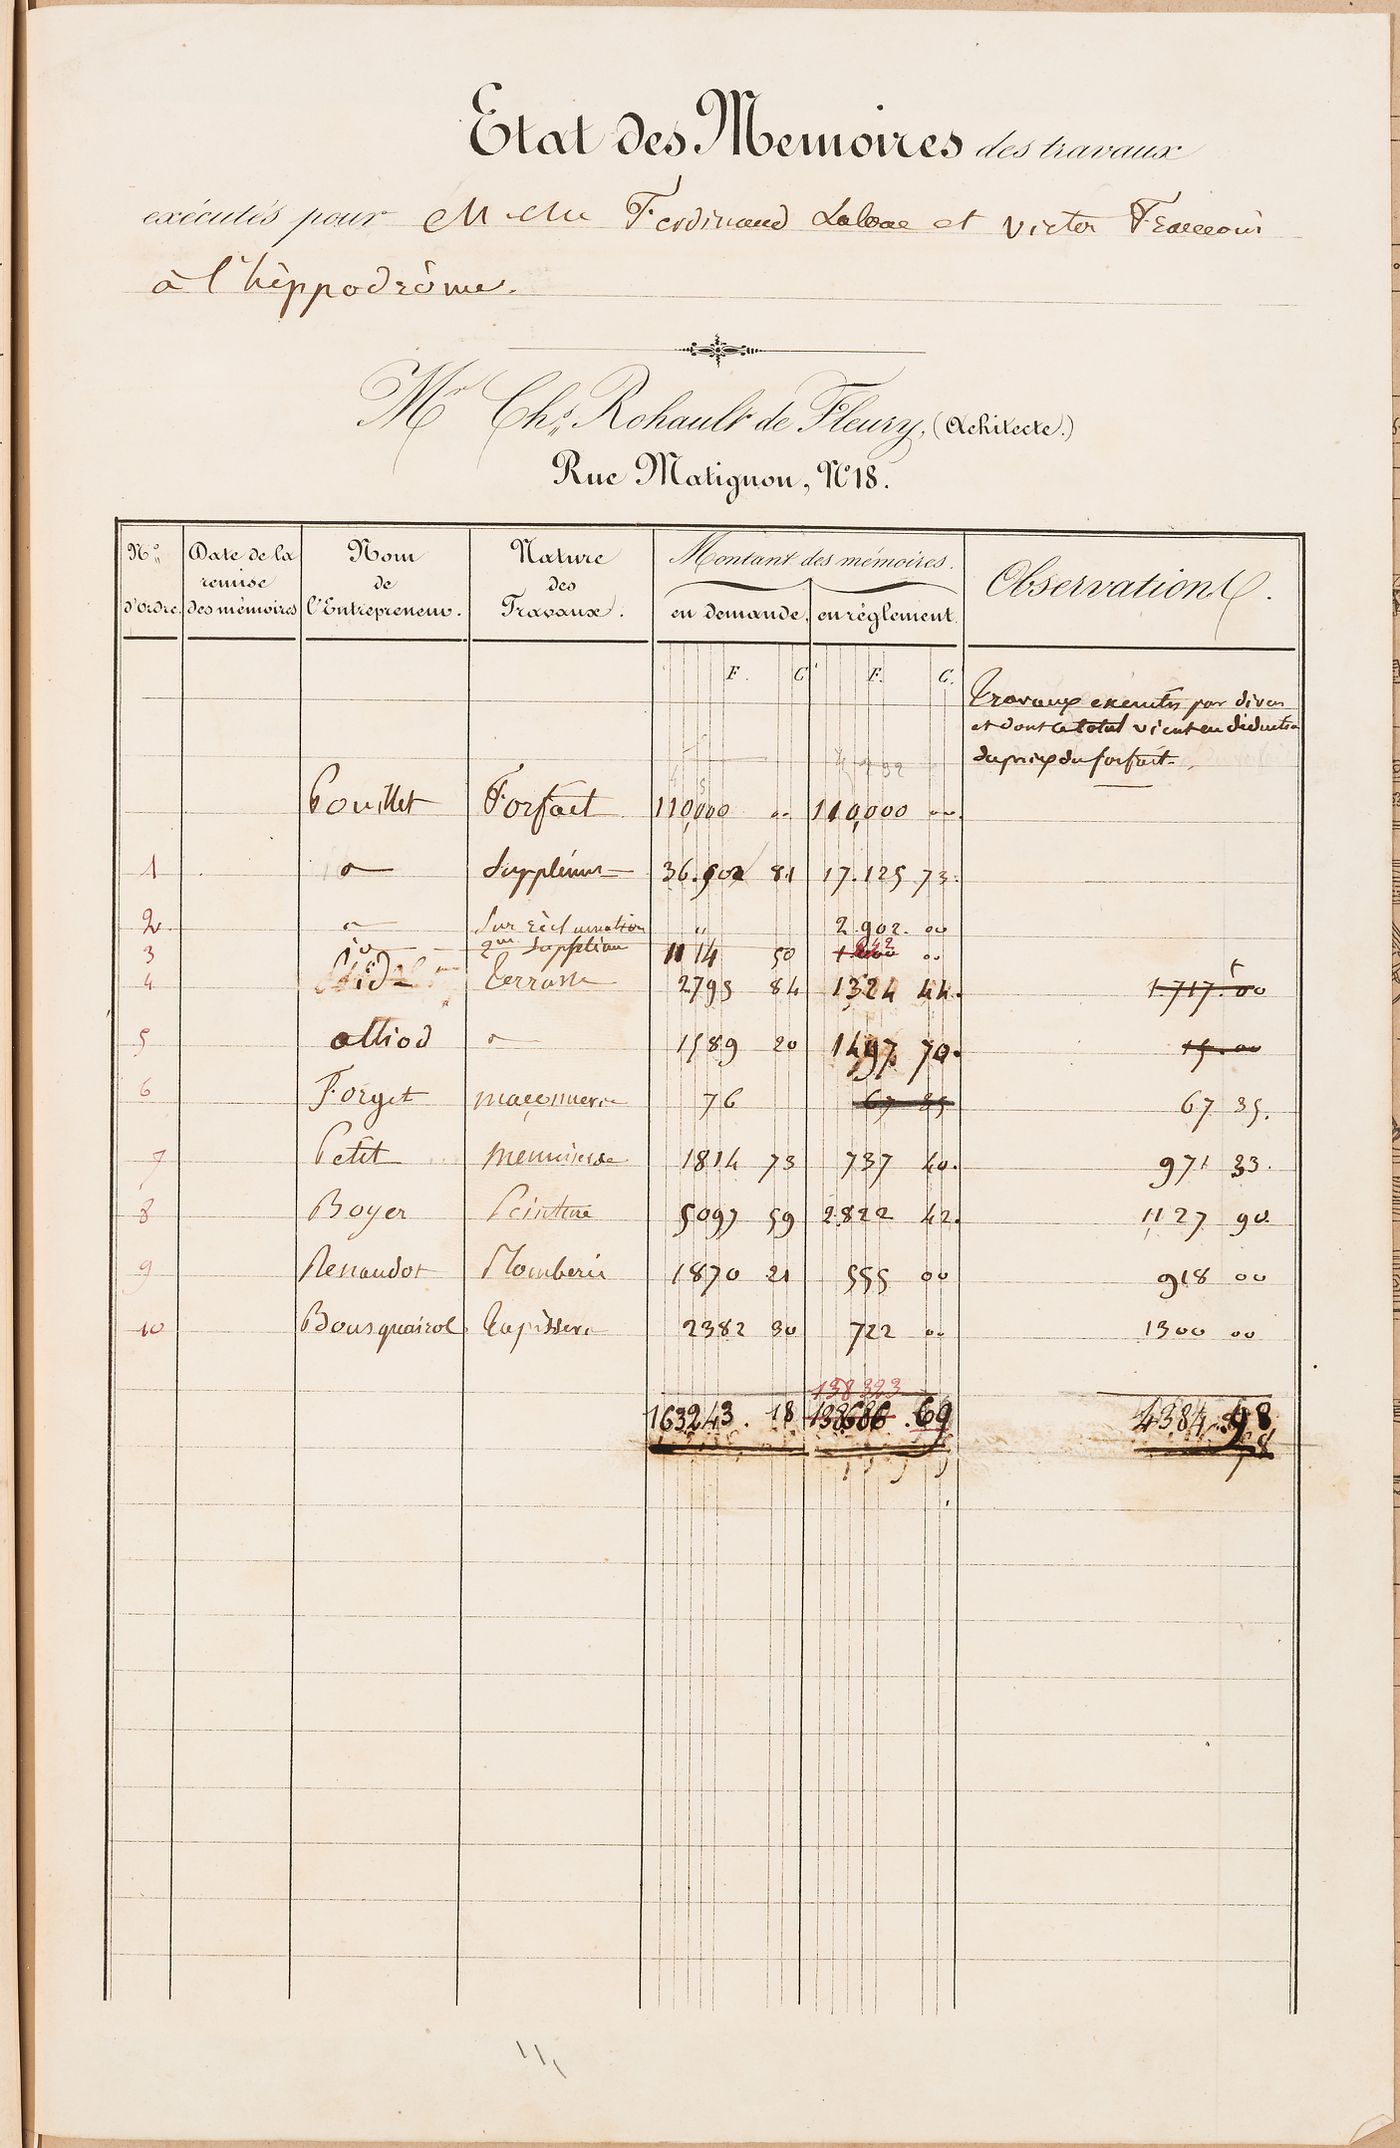 Hippodrome national, Paris: Record of payments to contractors